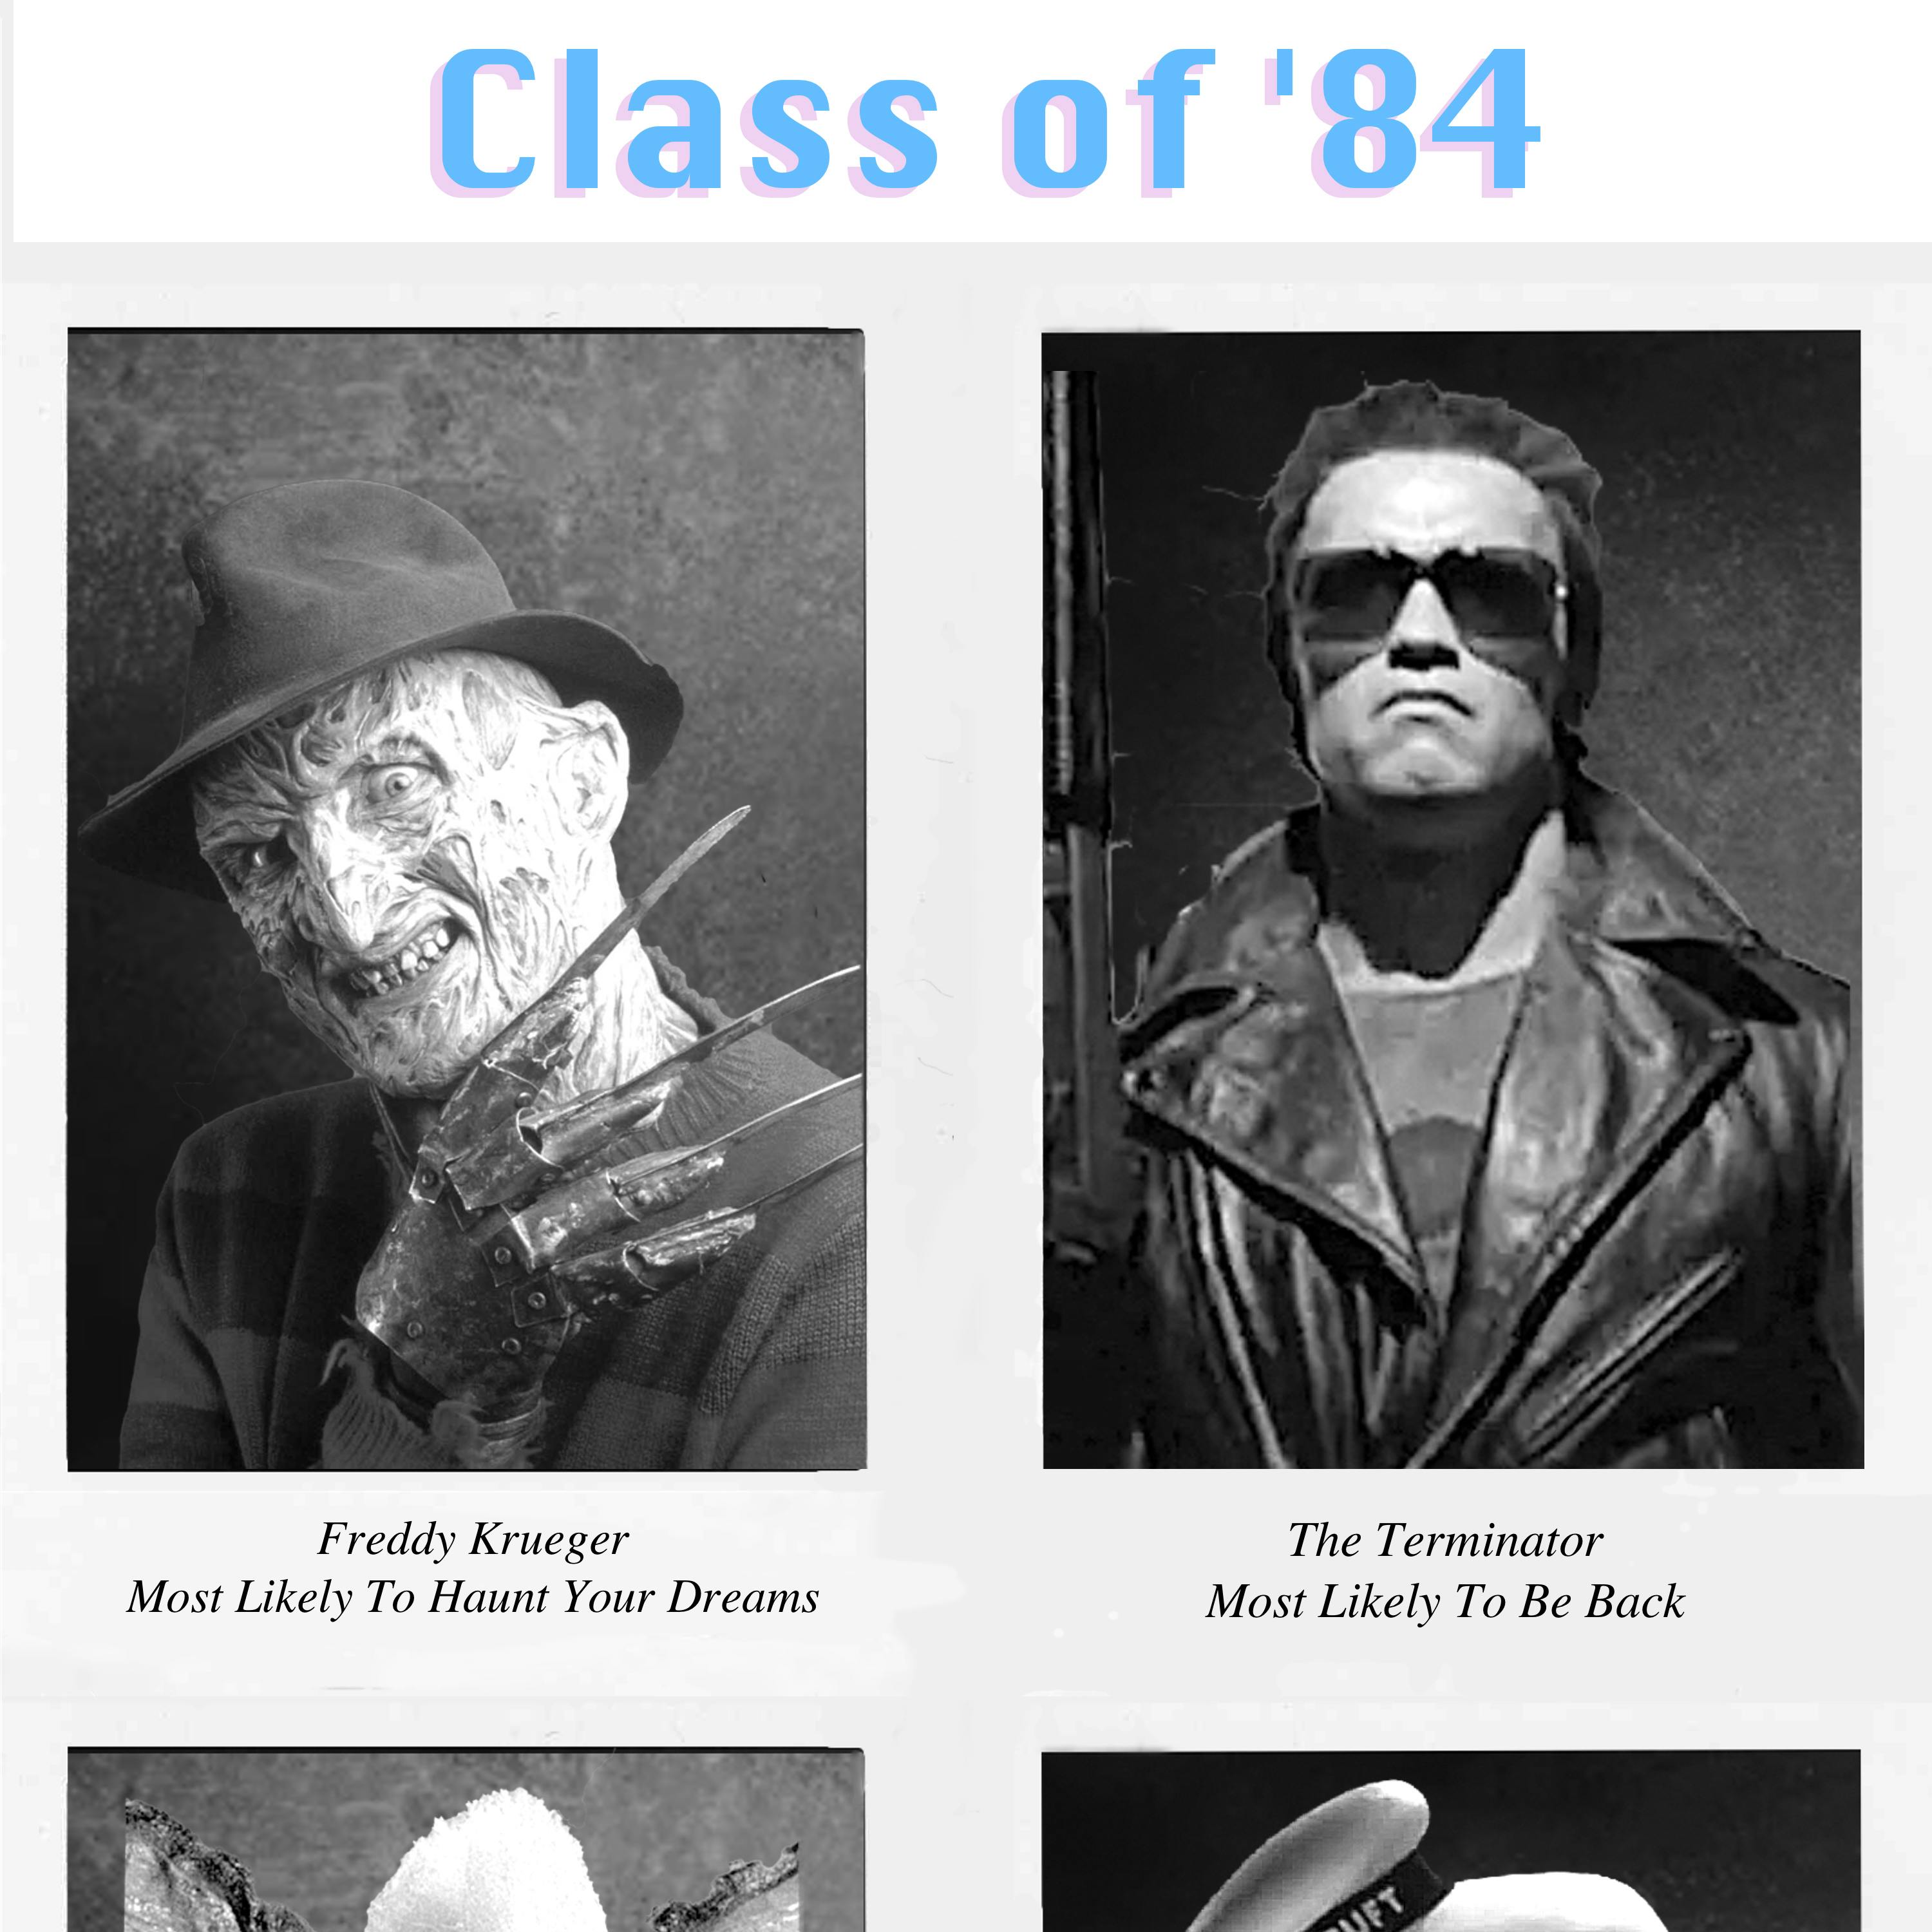 Class of ’84: Rise of The Villains